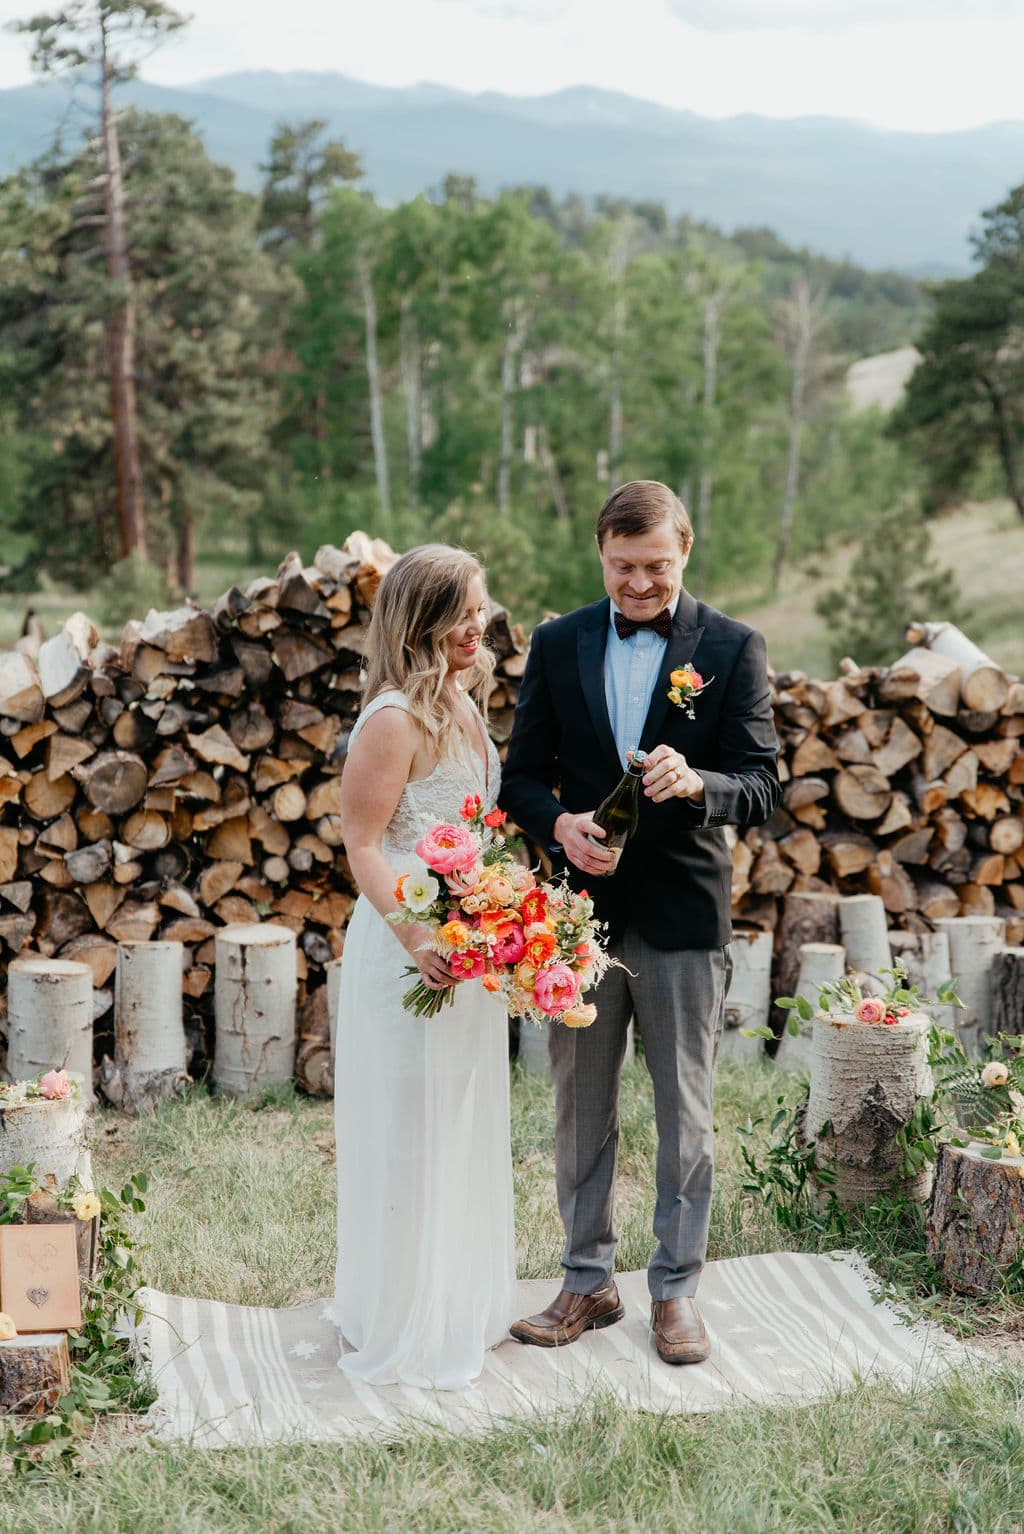 New elopement location for couples in colorado popping champagne